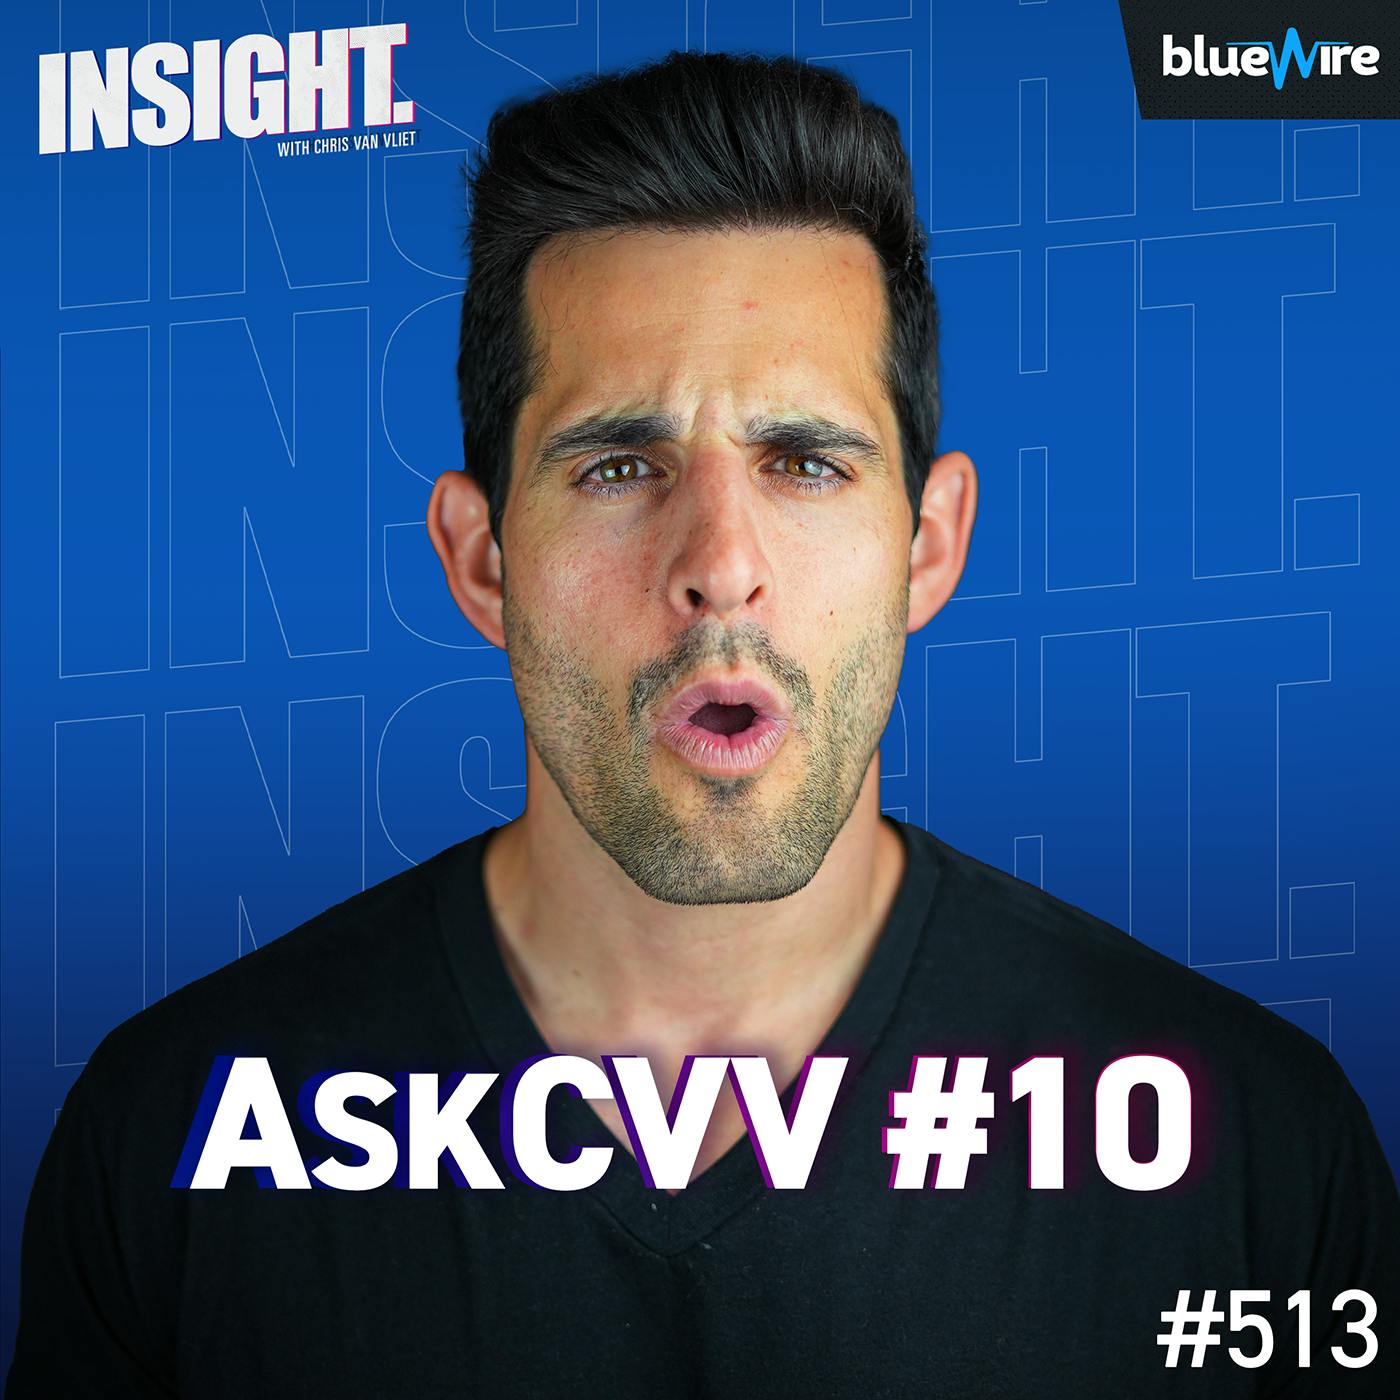 AskCVV #10 - CM Punk Thoughts, My All Time Favorite Diva, How To Book Better Guests, Interview Pet Peeves